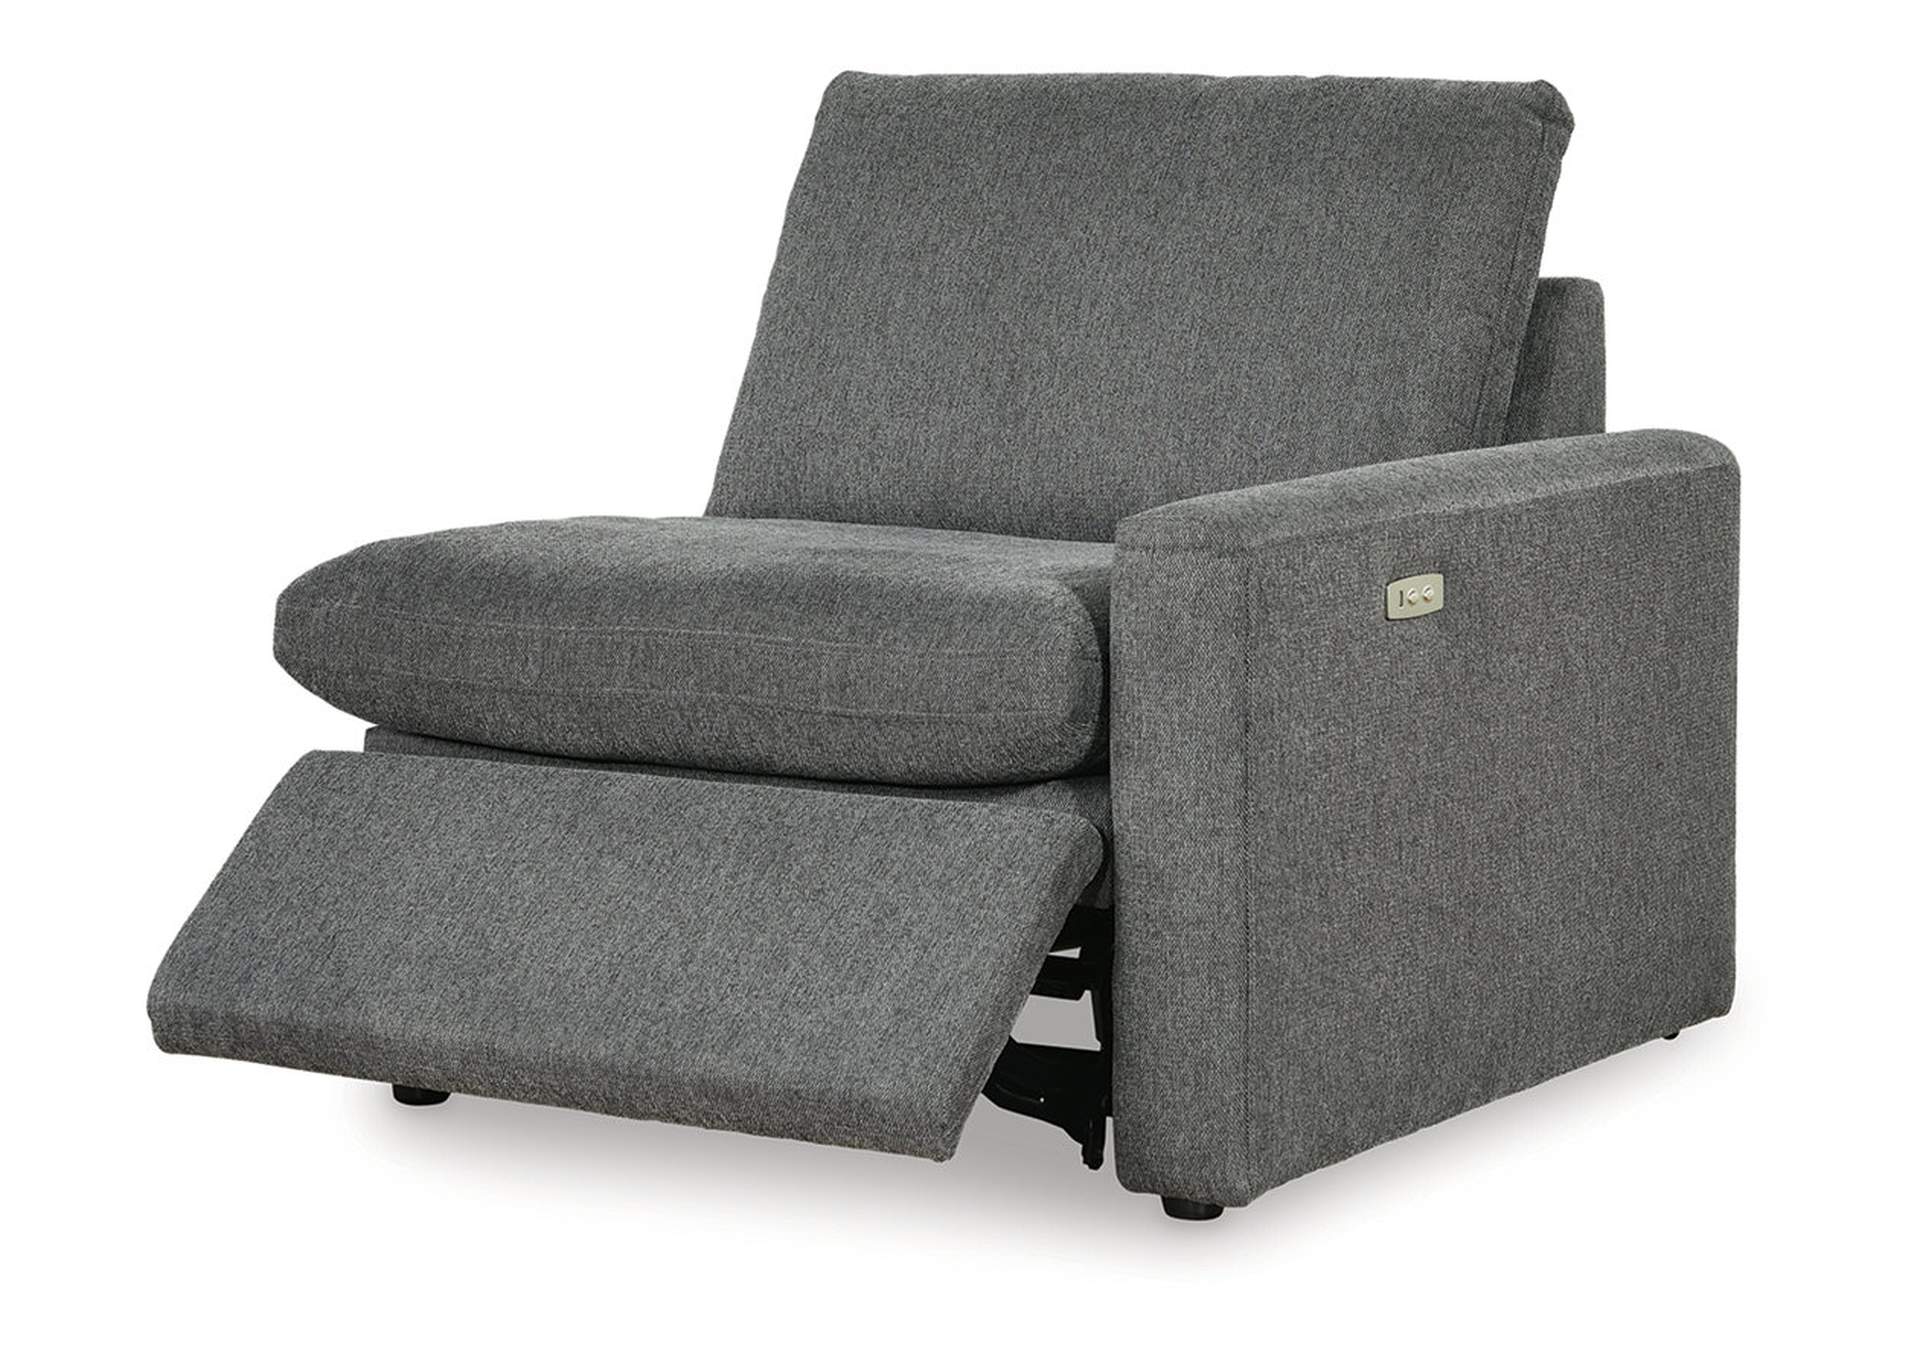 Hartsdale Right-Arm Facing Power Recliner,Signature Design By Ashley